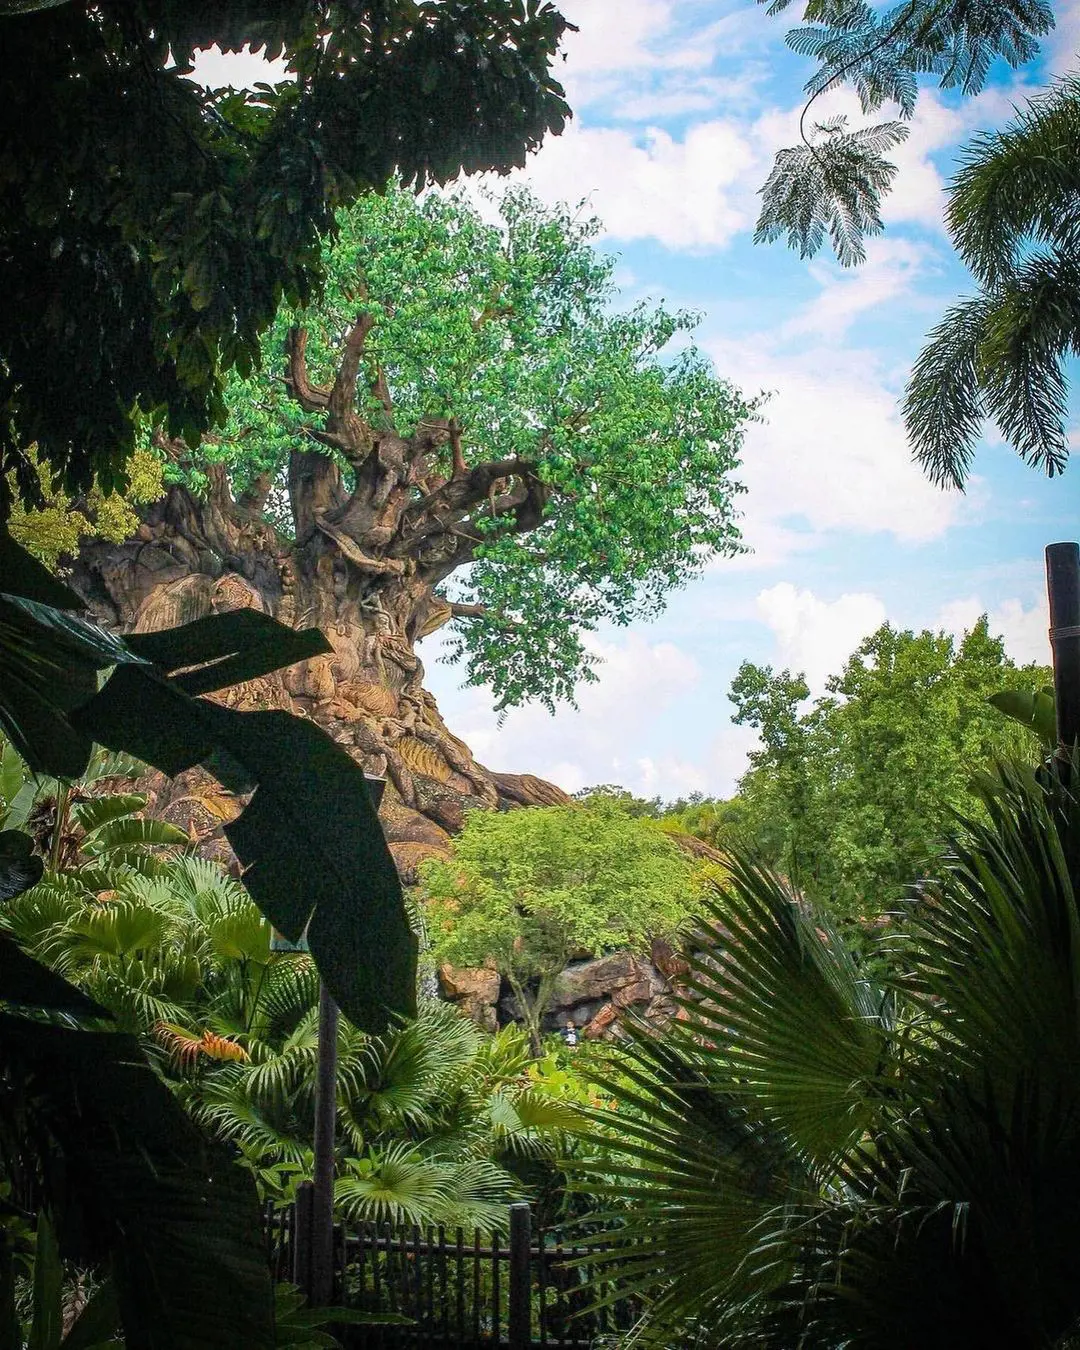 Disney's Animal Kingdom Theme Park celebrated 25 years of the magic nature in 2023